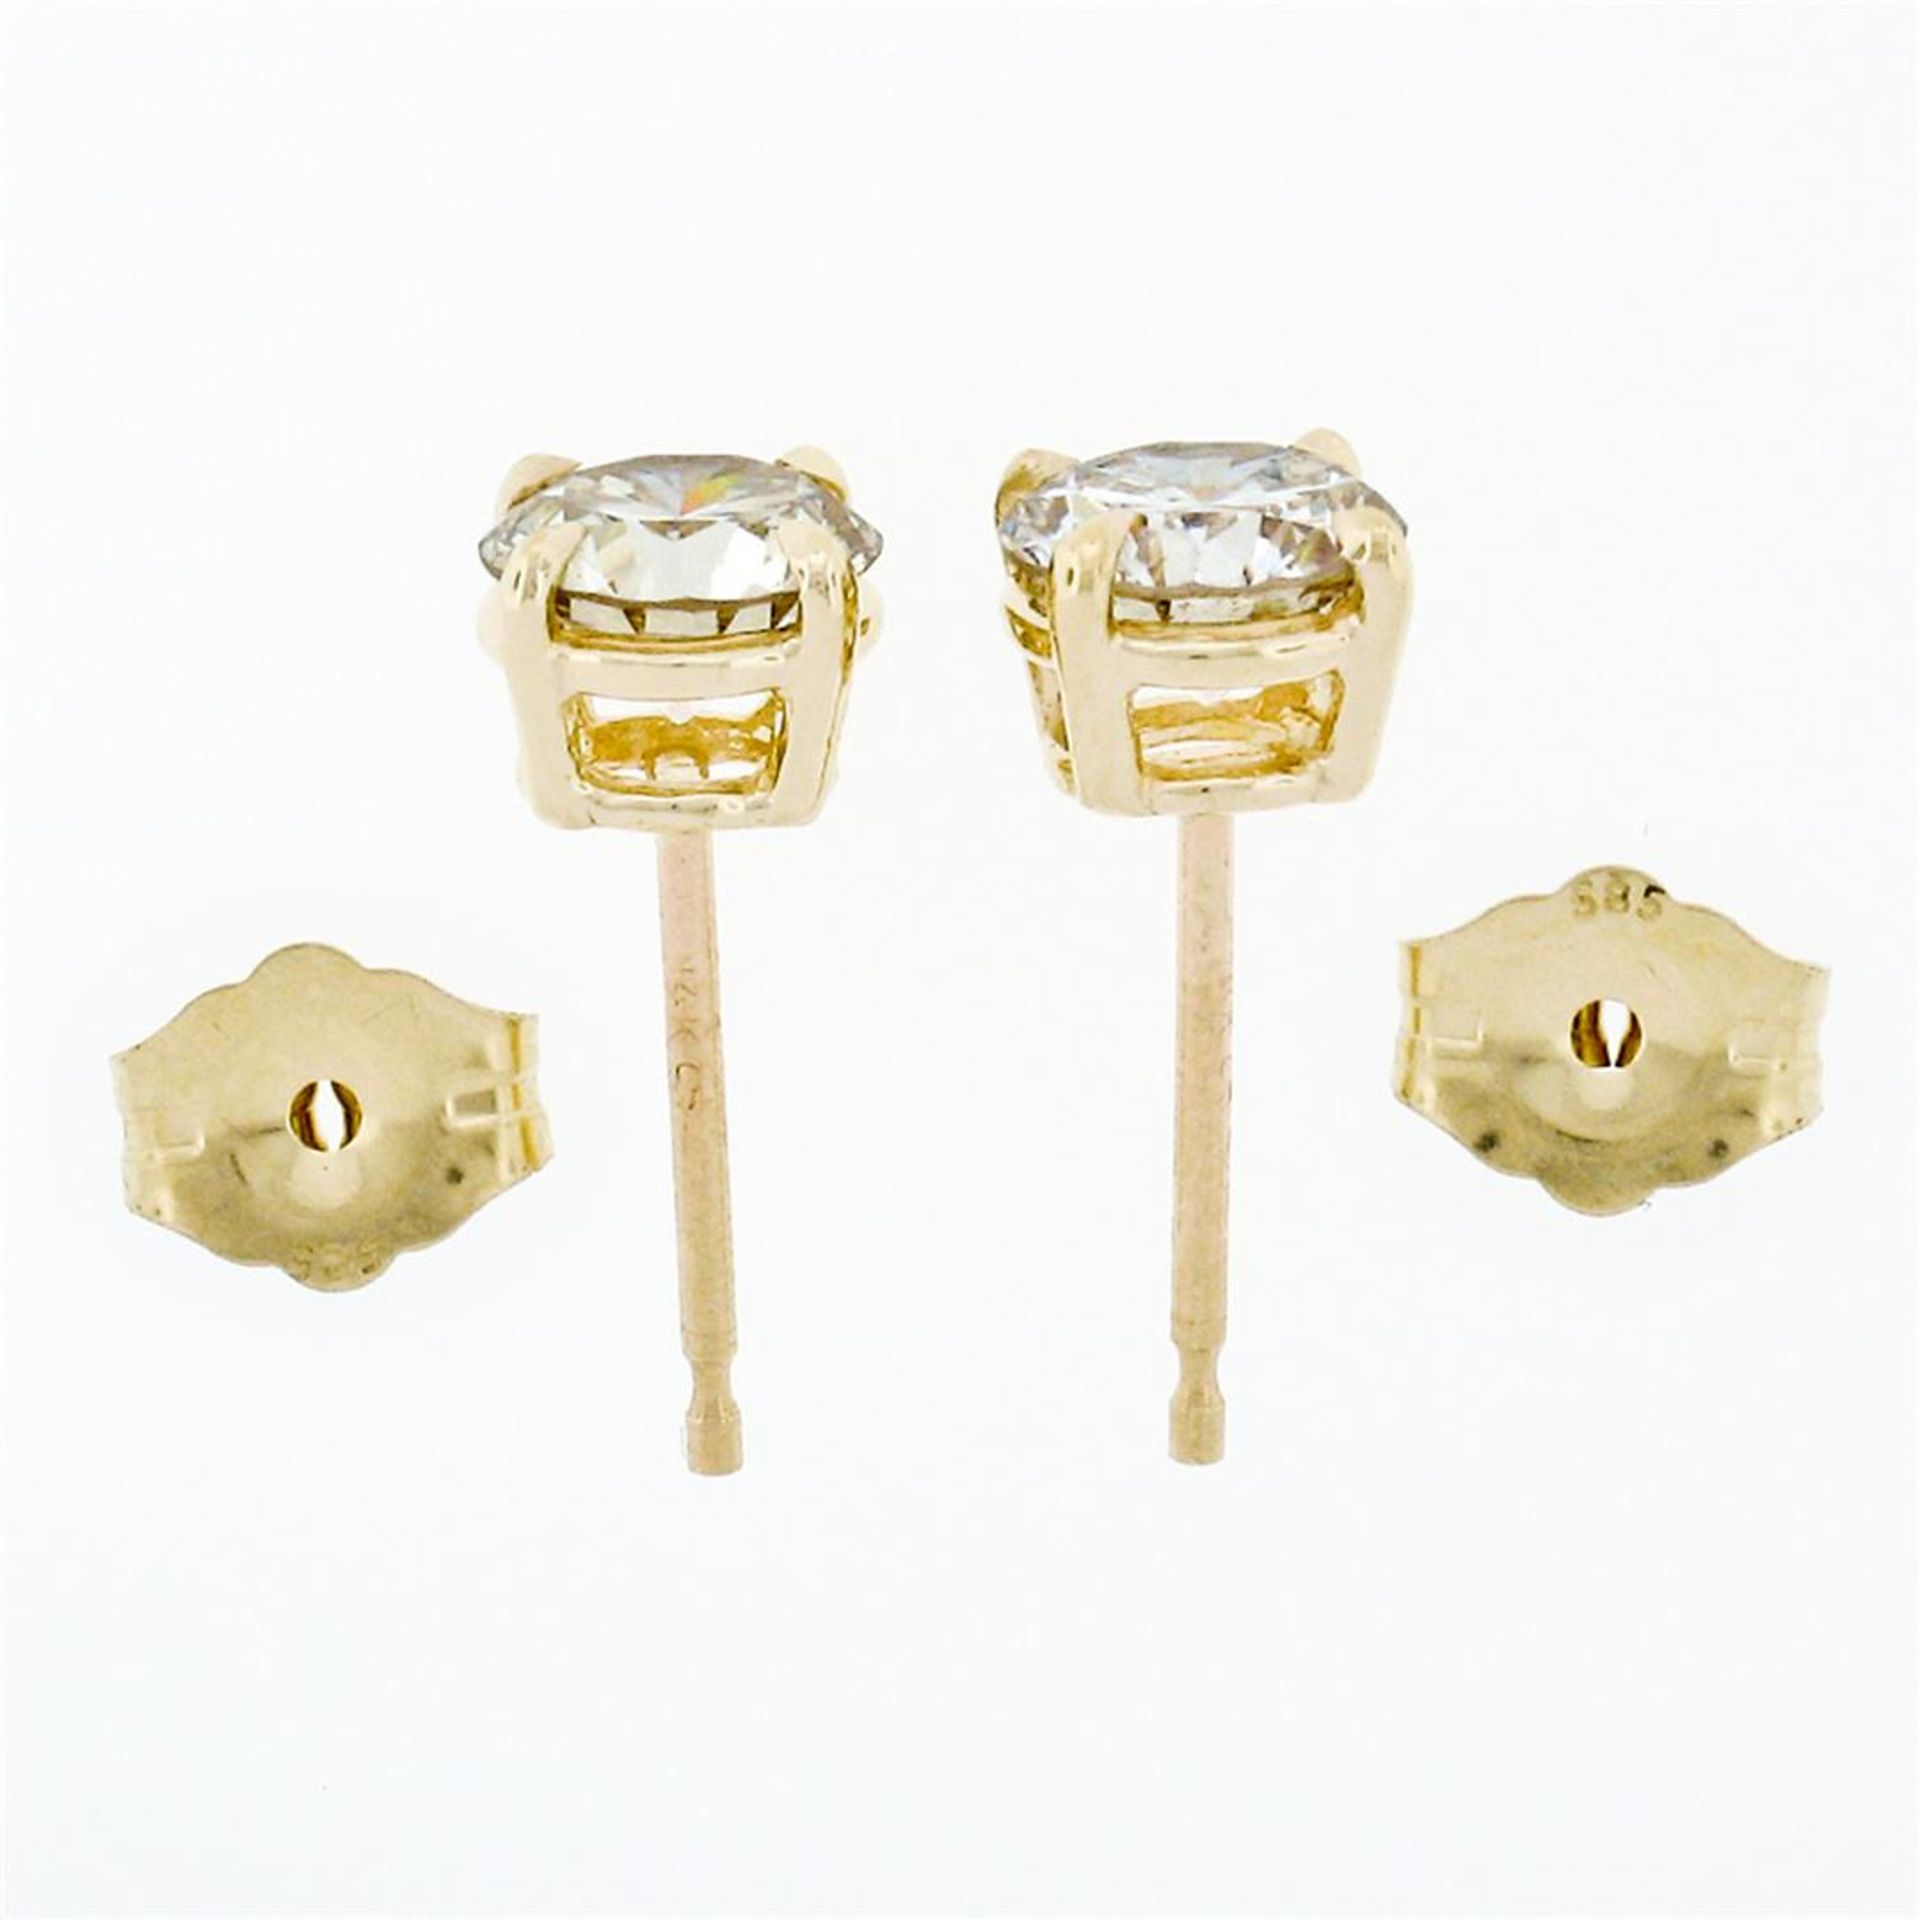 14k Yellow Gold 1.11ctw Round Brilliant Cut Diamond Claw Prong Stud Earrings - Image 4 of 6